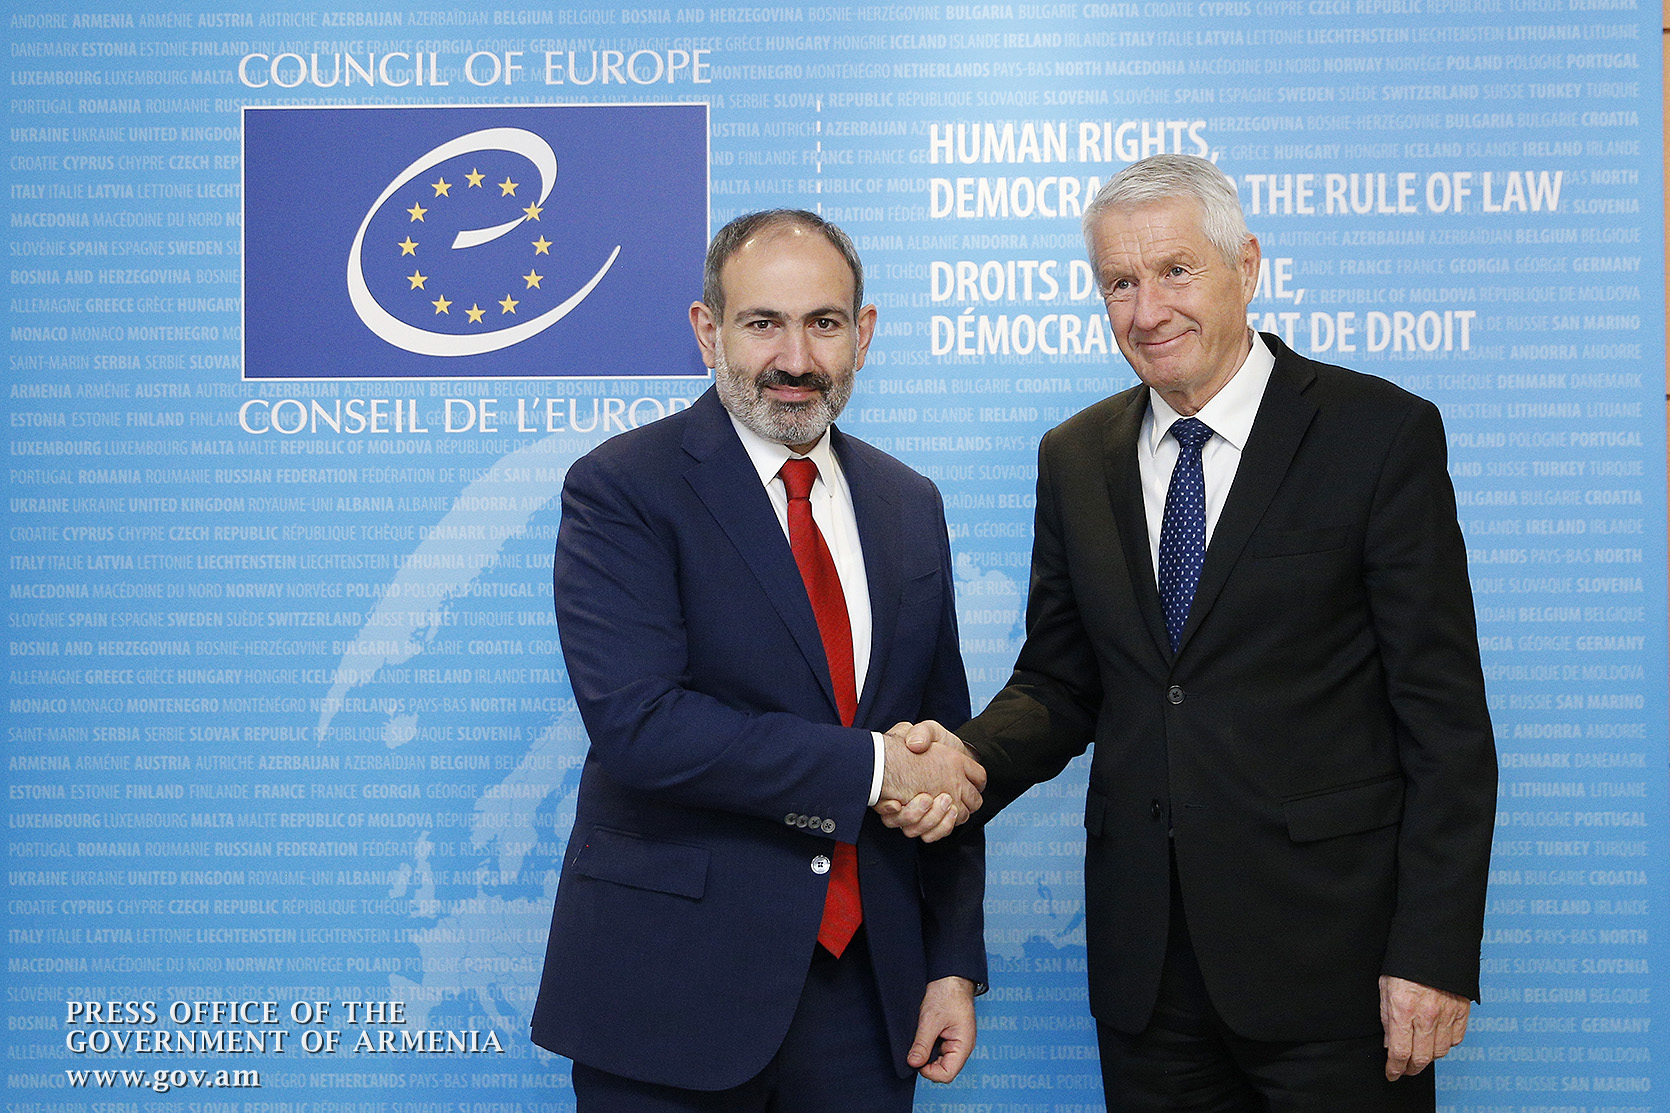 Thorbjørn Jagland to Nikol Pashinyan: “CoE will continue to support Armenia in developing democracy”